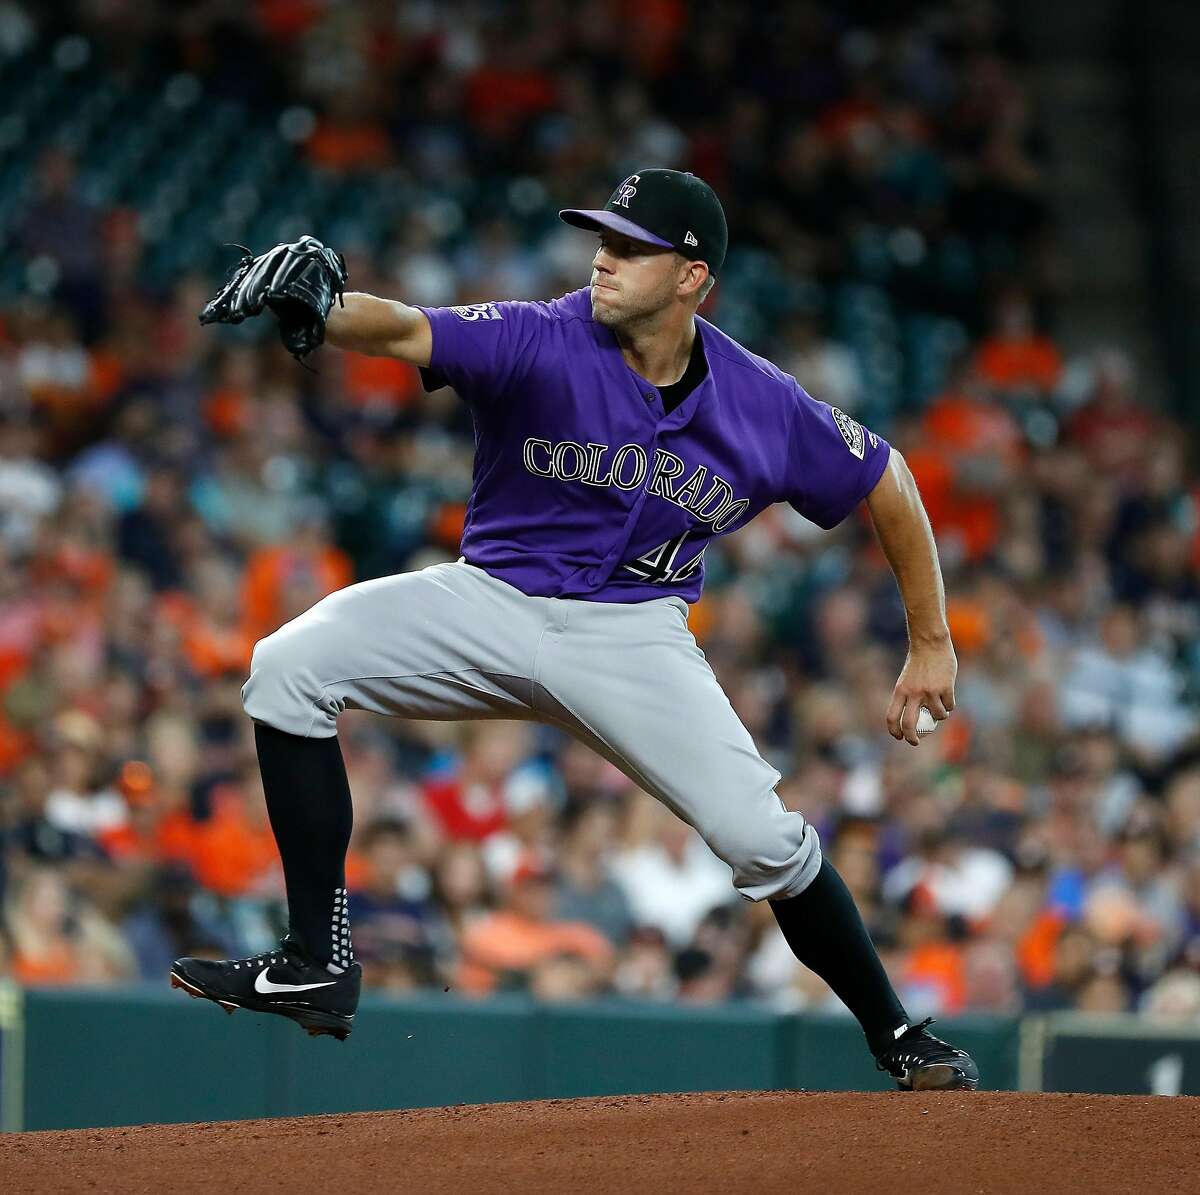 Giants claim pitcher Tyler Anderson from Rockies, cut Kyle Barraclough